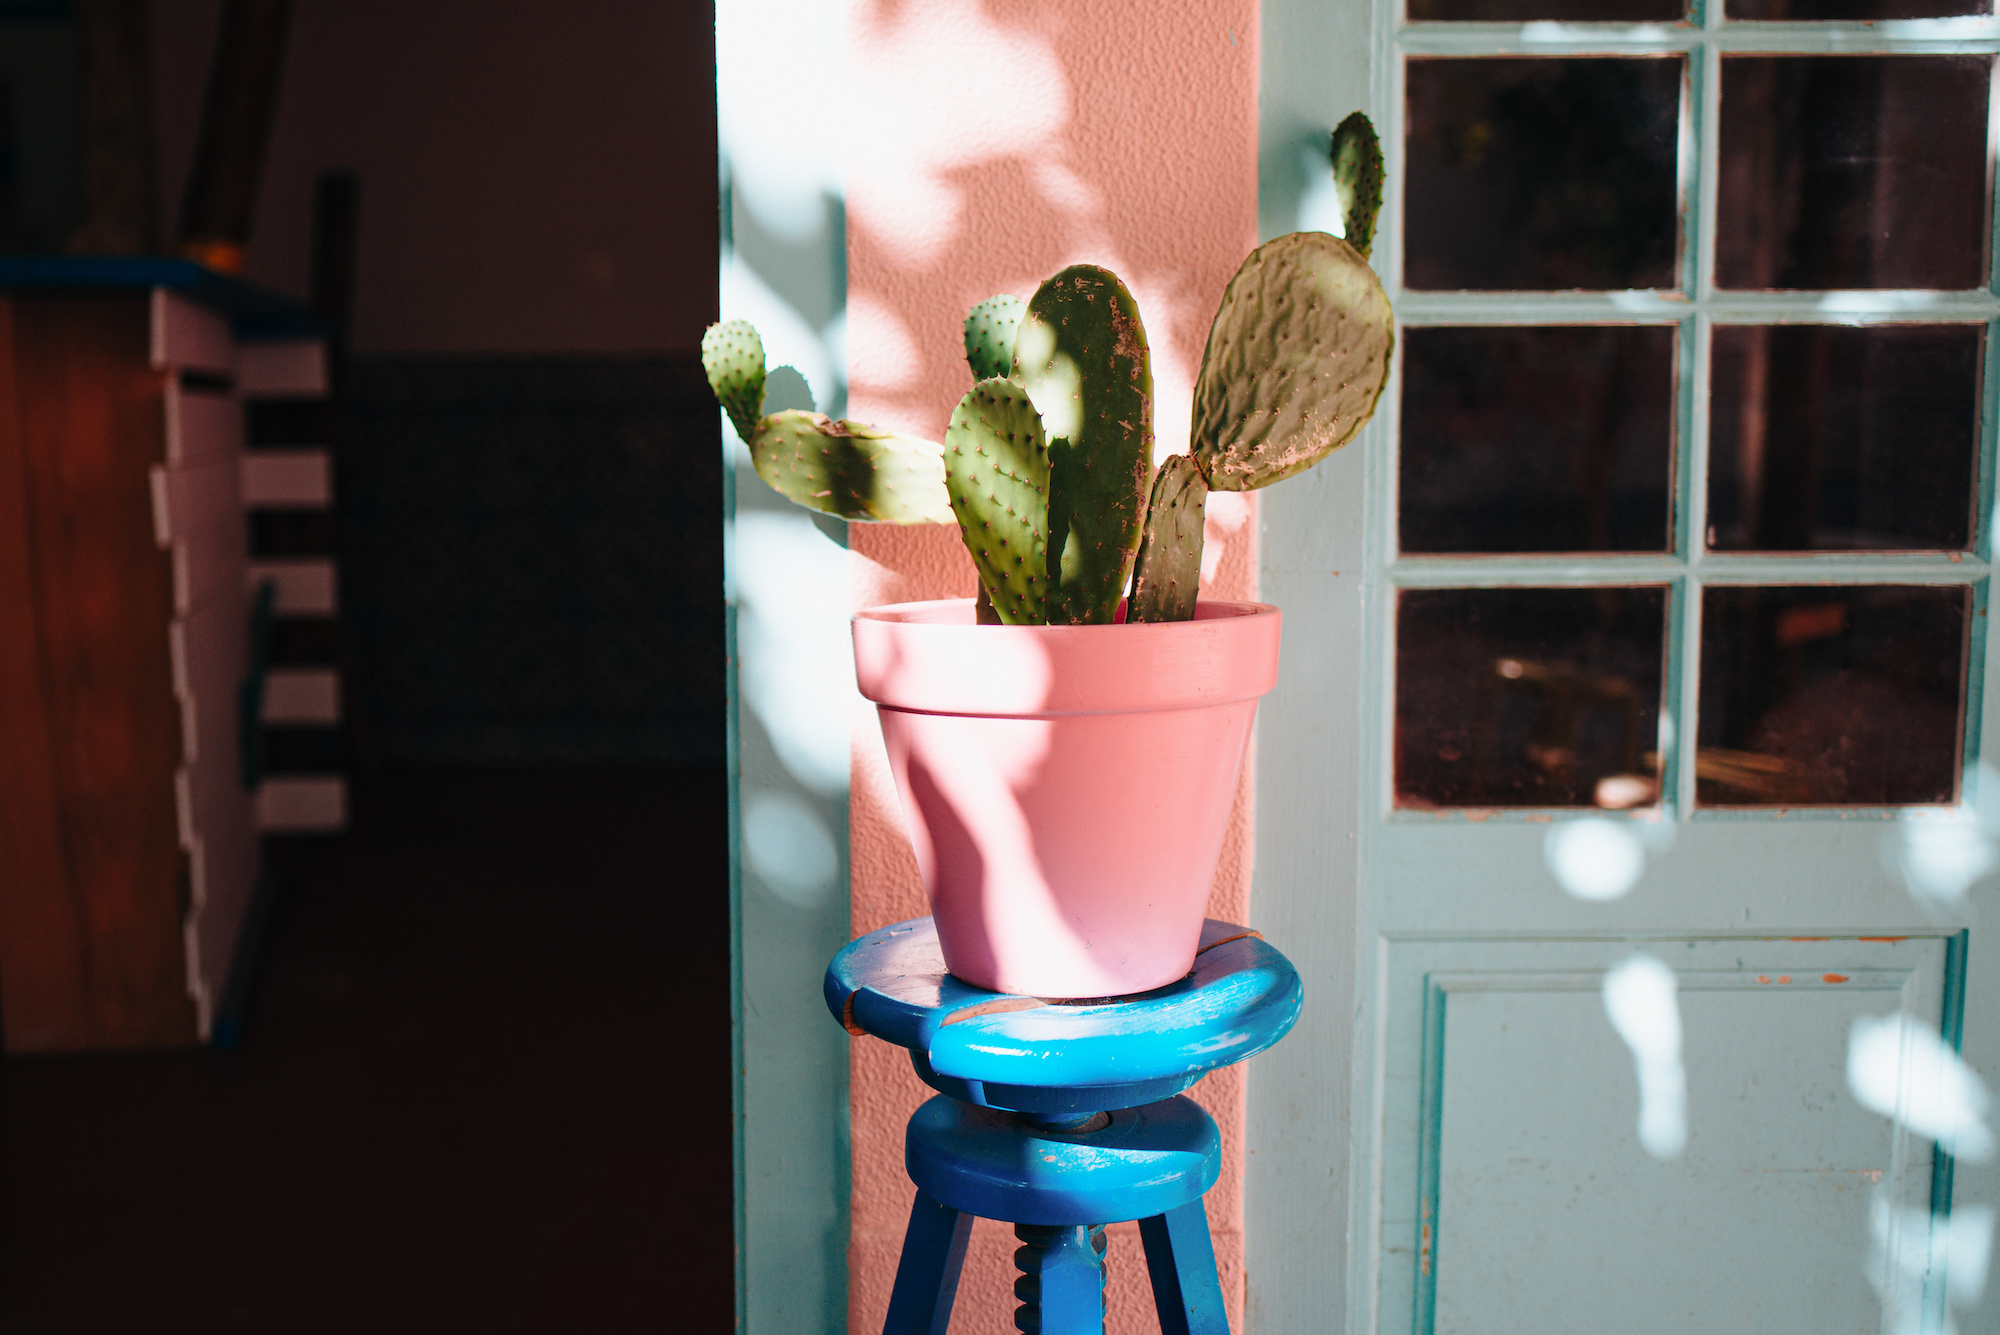 A cactus in a pink pot on a blue stool.